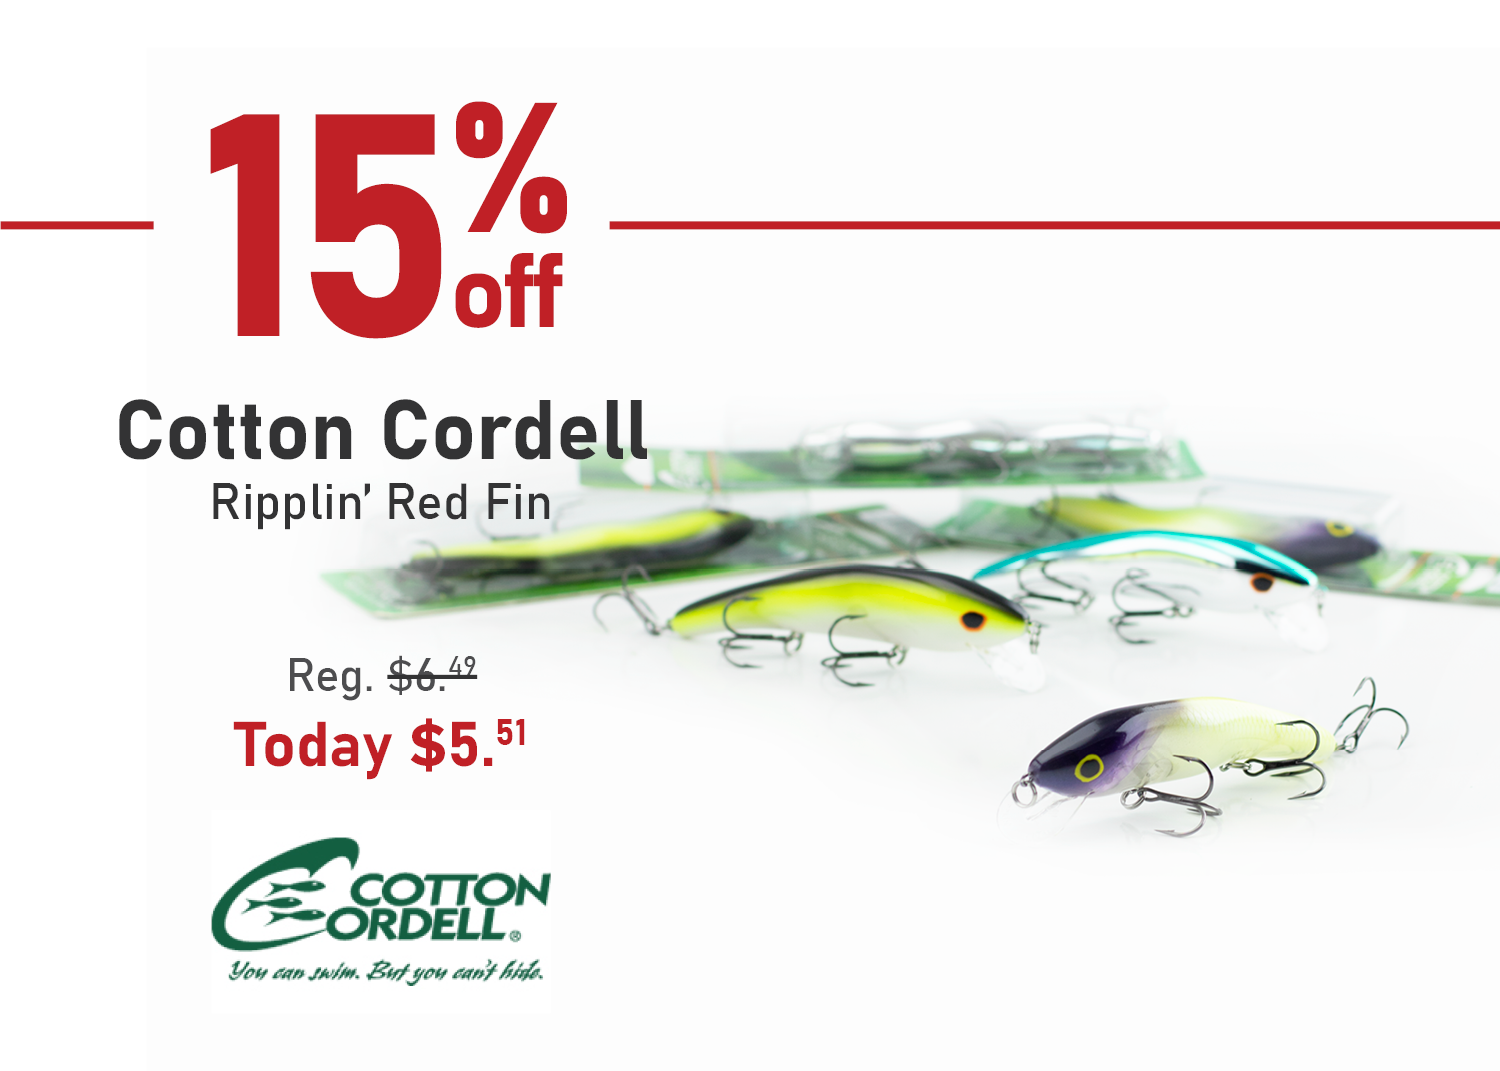 Save 15% on the Cotton Cordell Ripplin' Red Fin